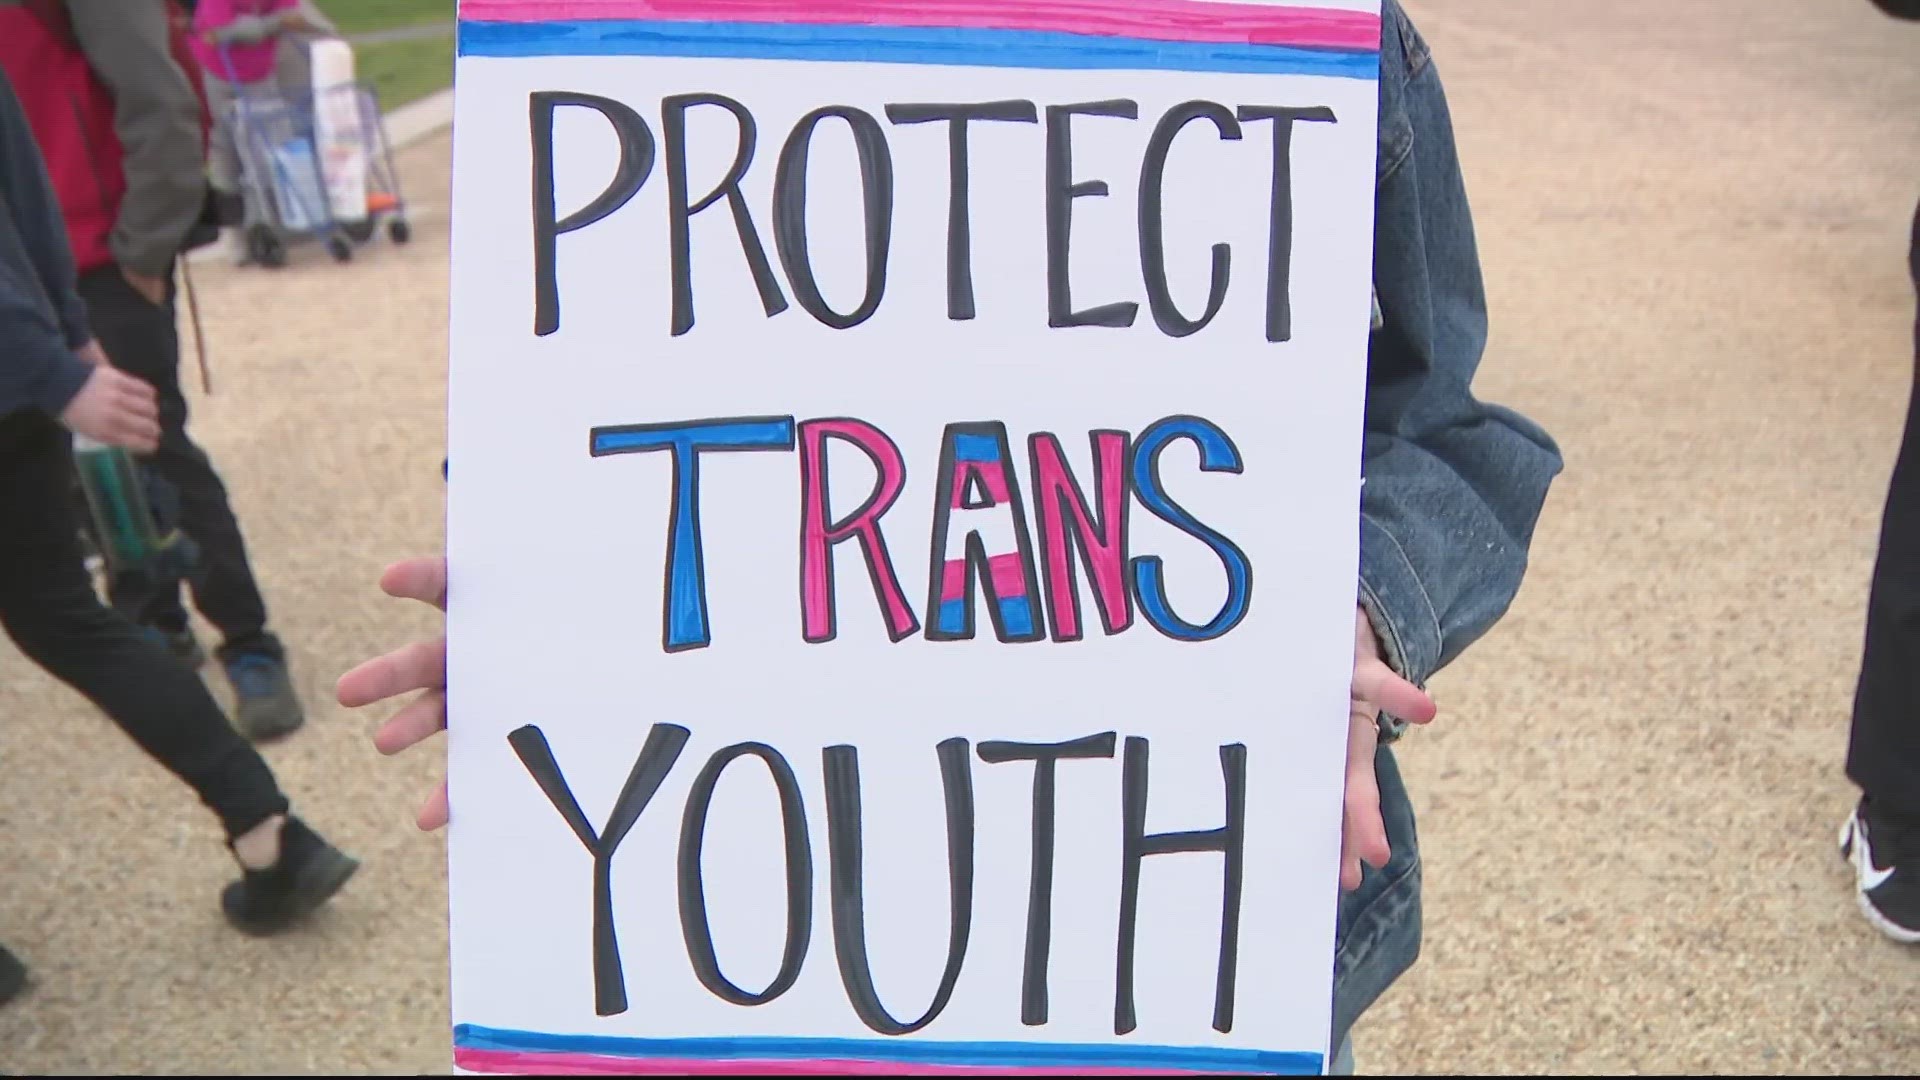 Activists called out anti-trans legislation during their march on Friday.